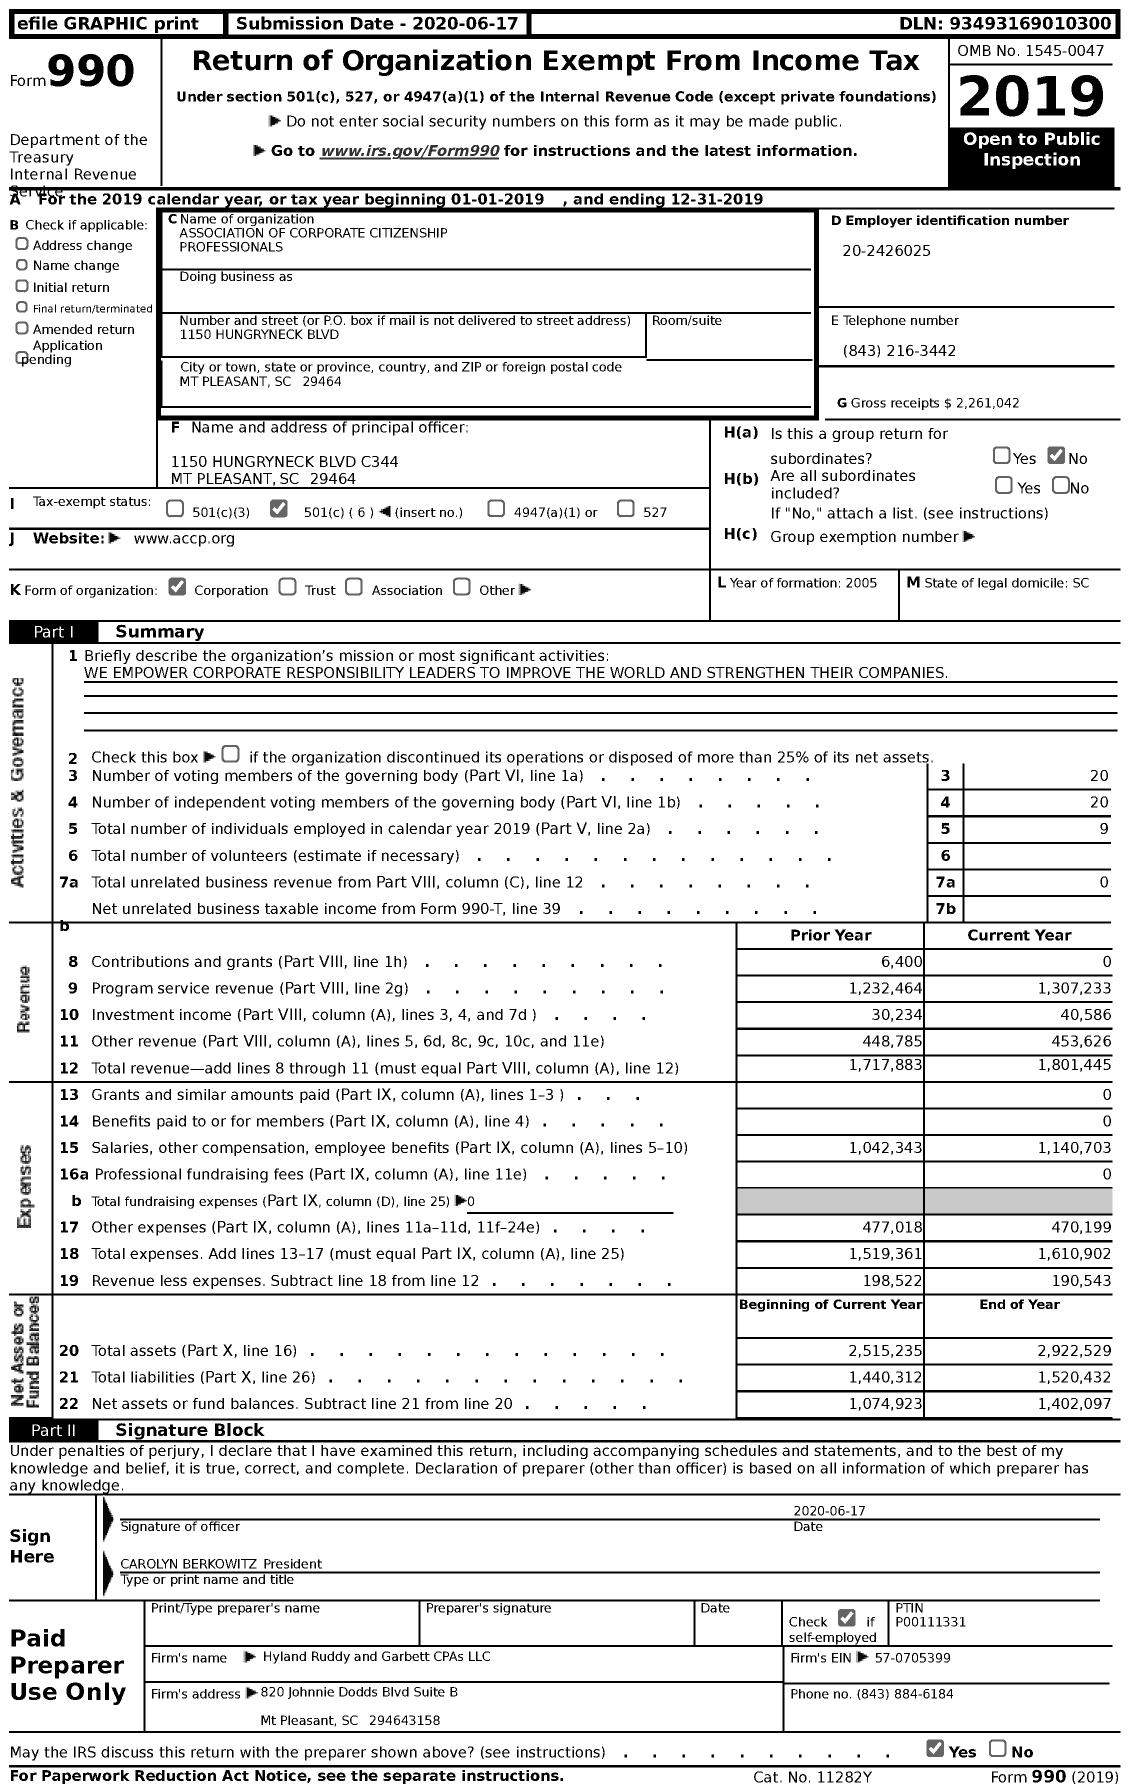 Image of first page of 2019 Form 990 for Association of Corporate Citizenship Professionals (ACCP)